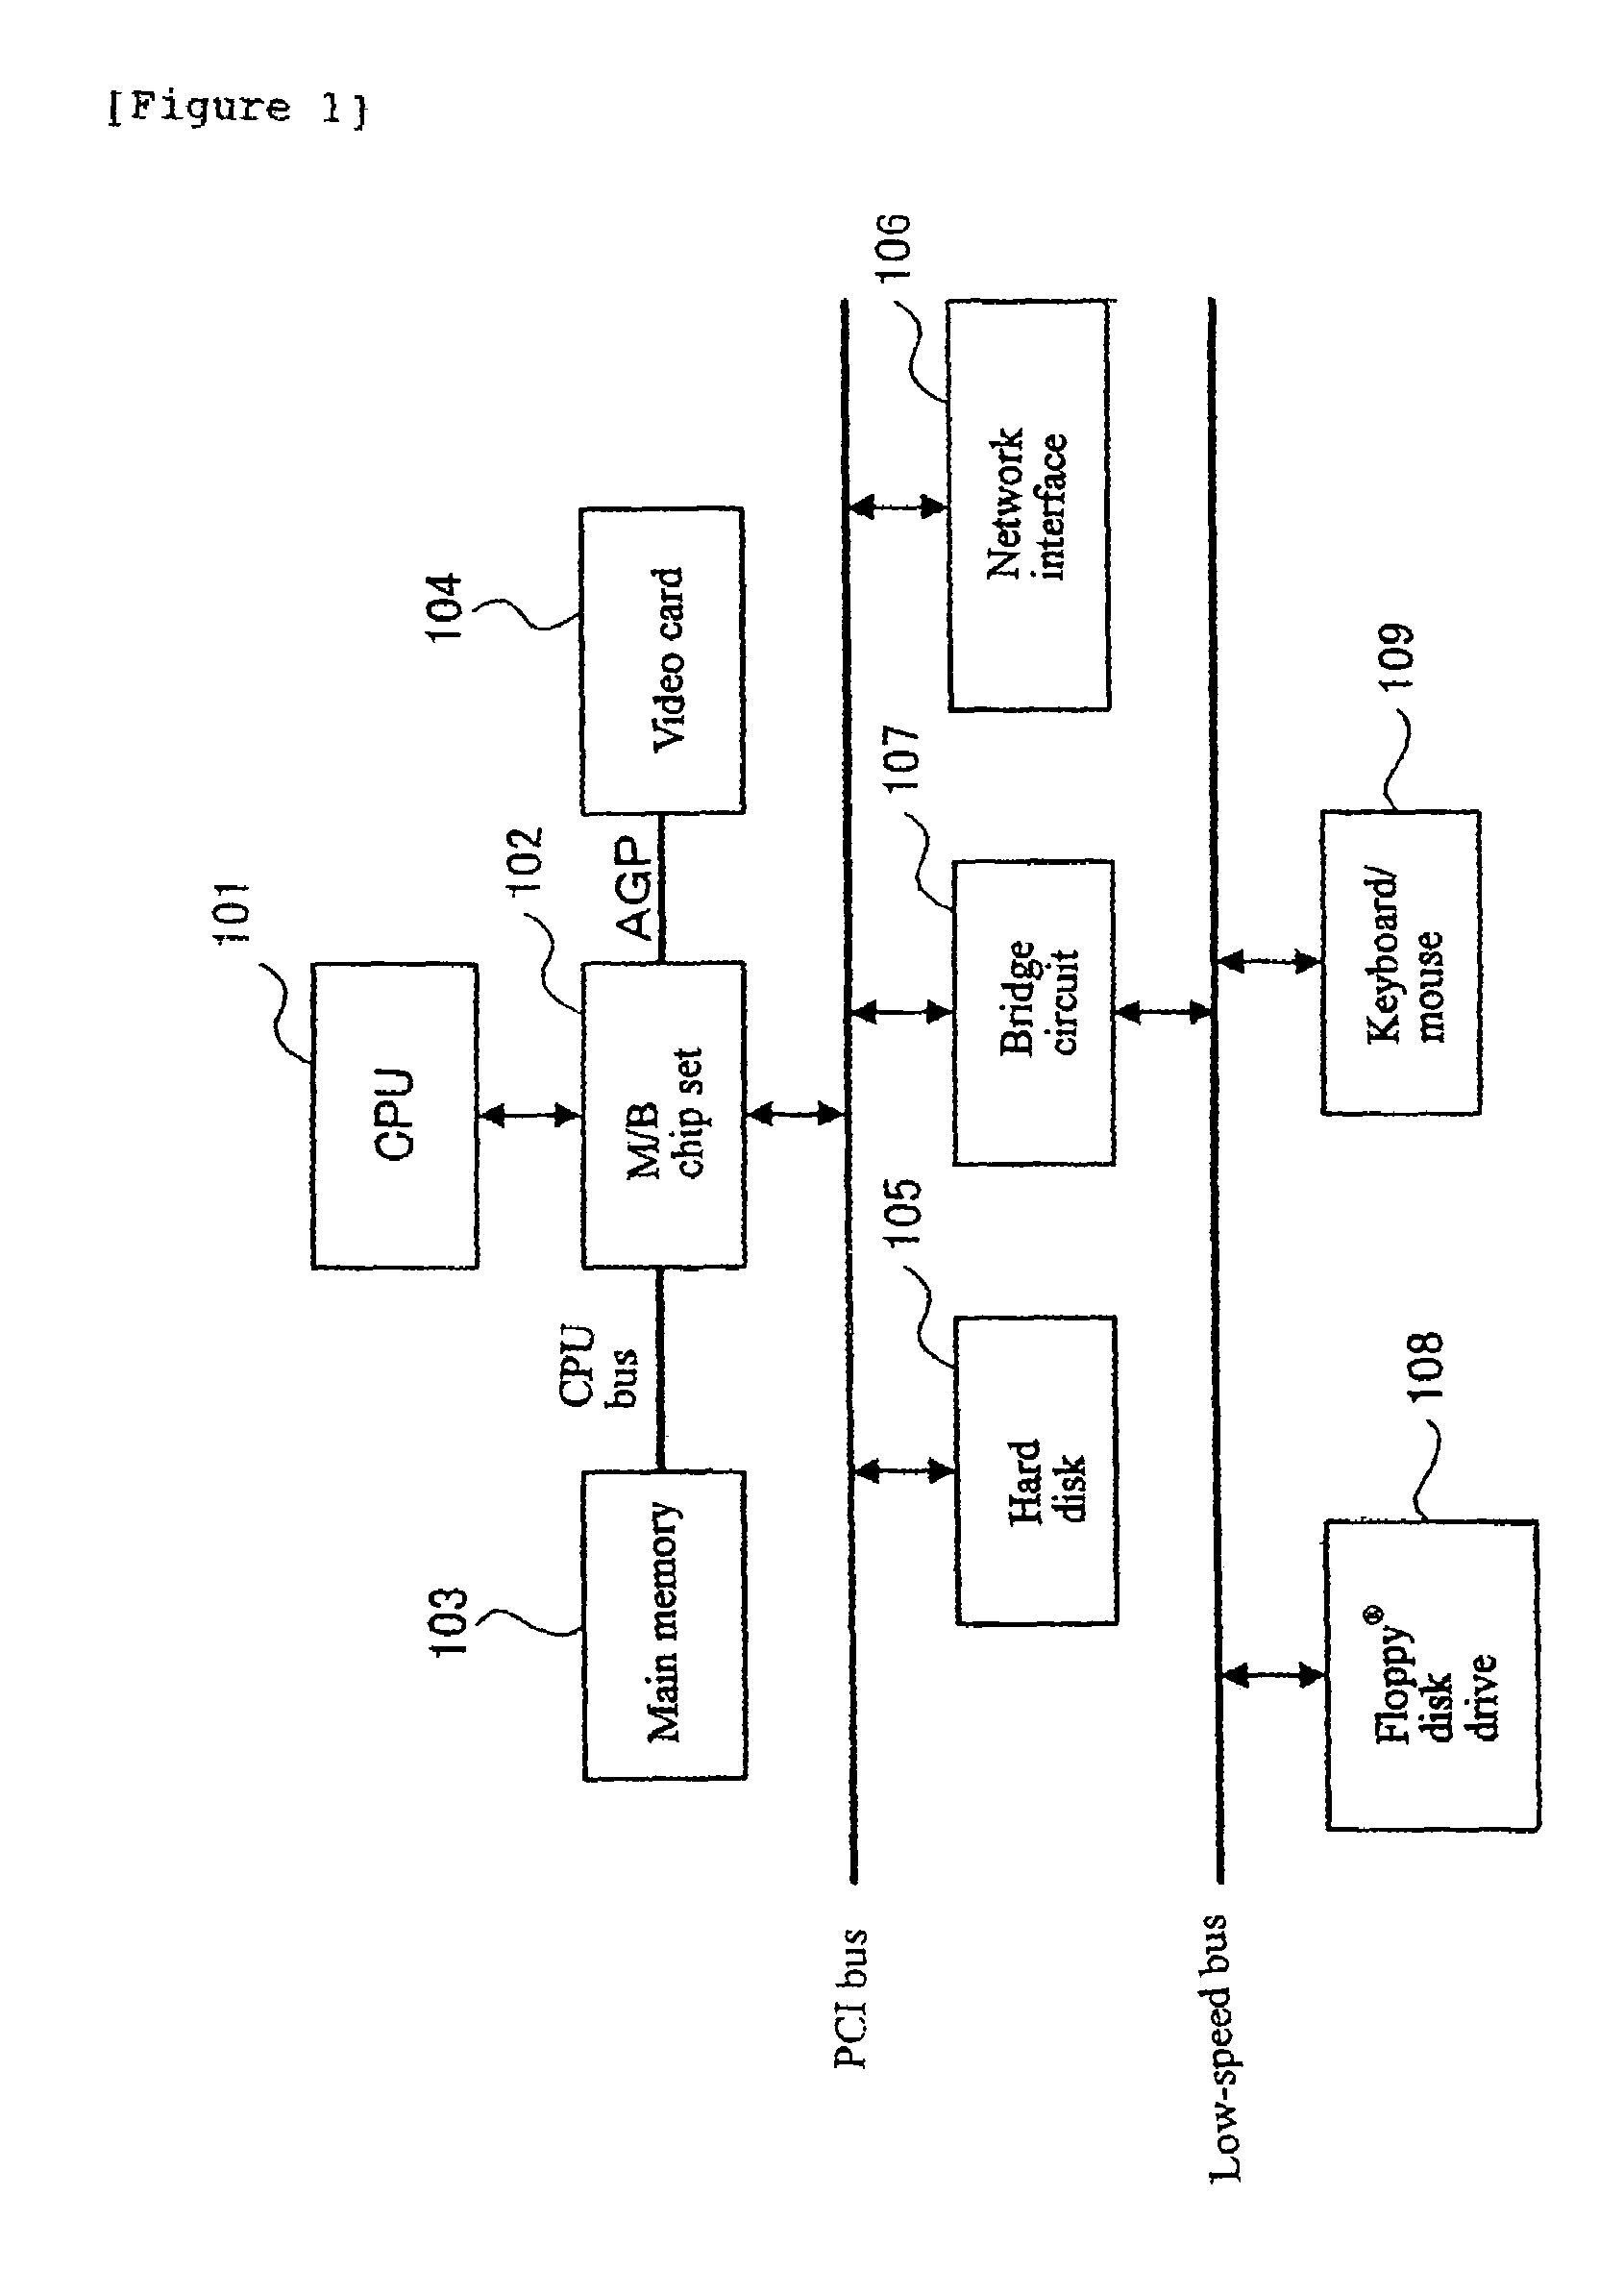 System, method, and computer program product for generating a web application with dynamic content